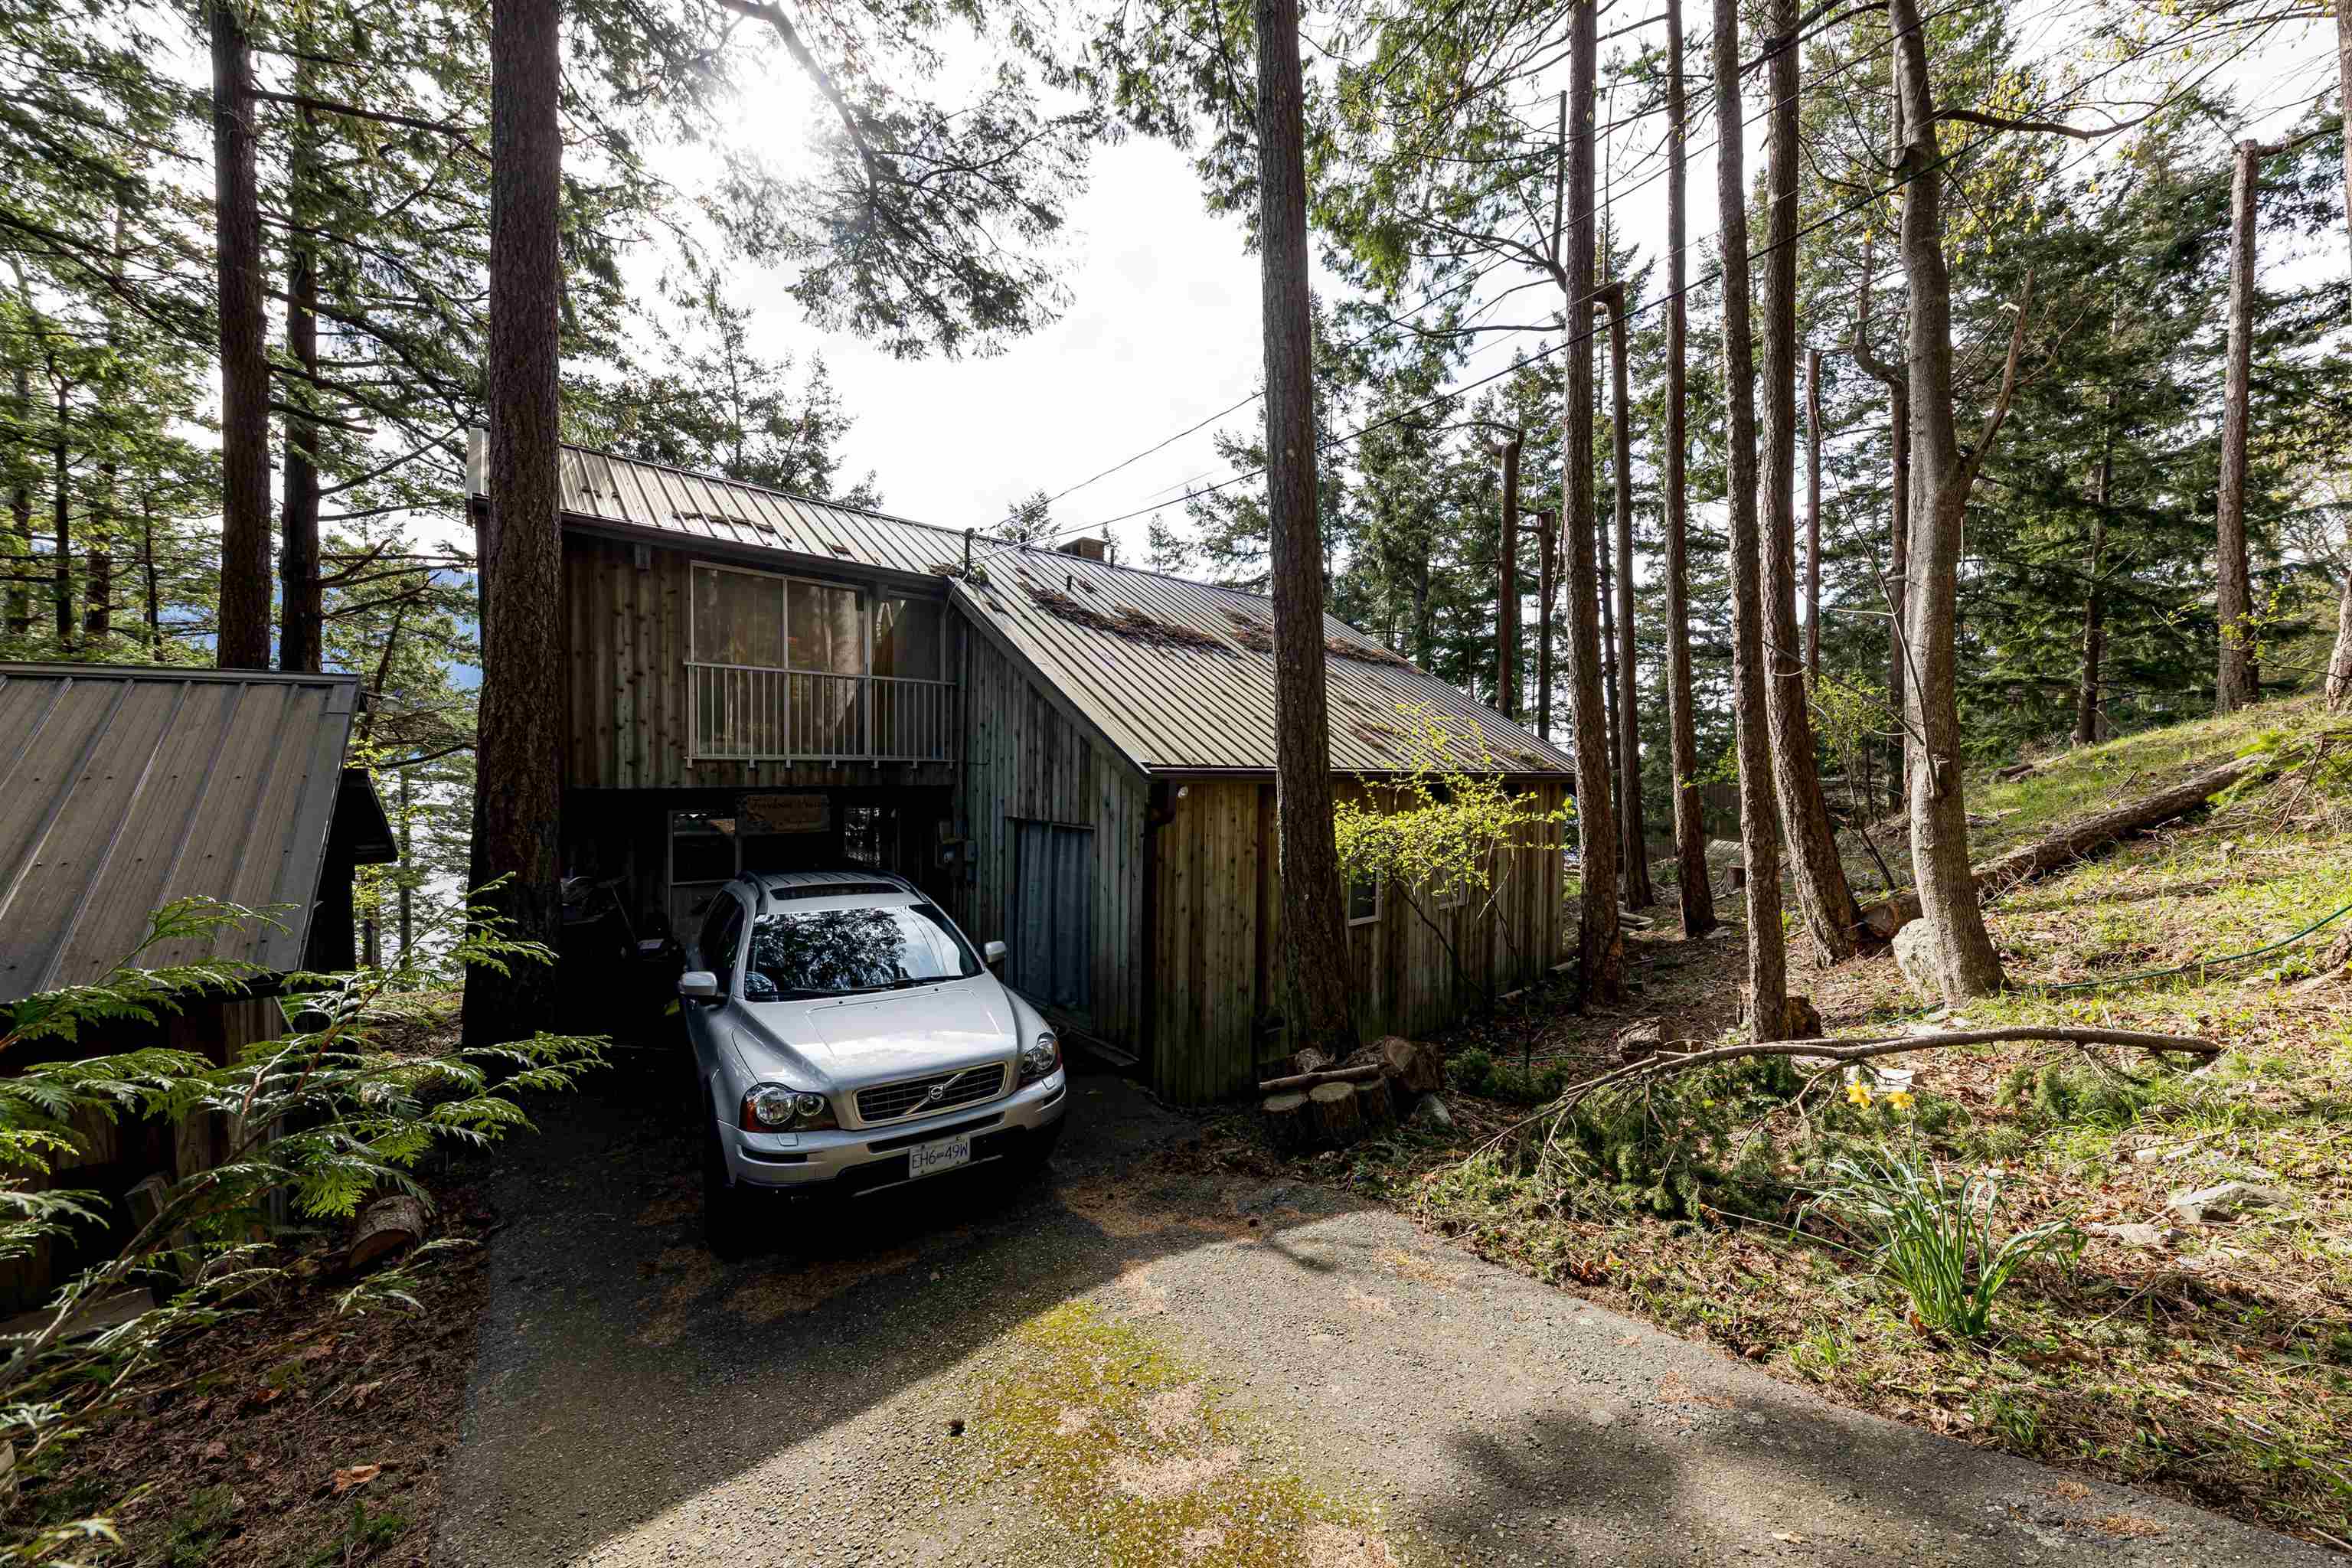 Listing image of 1591 EAGLE CLIFF ROAD